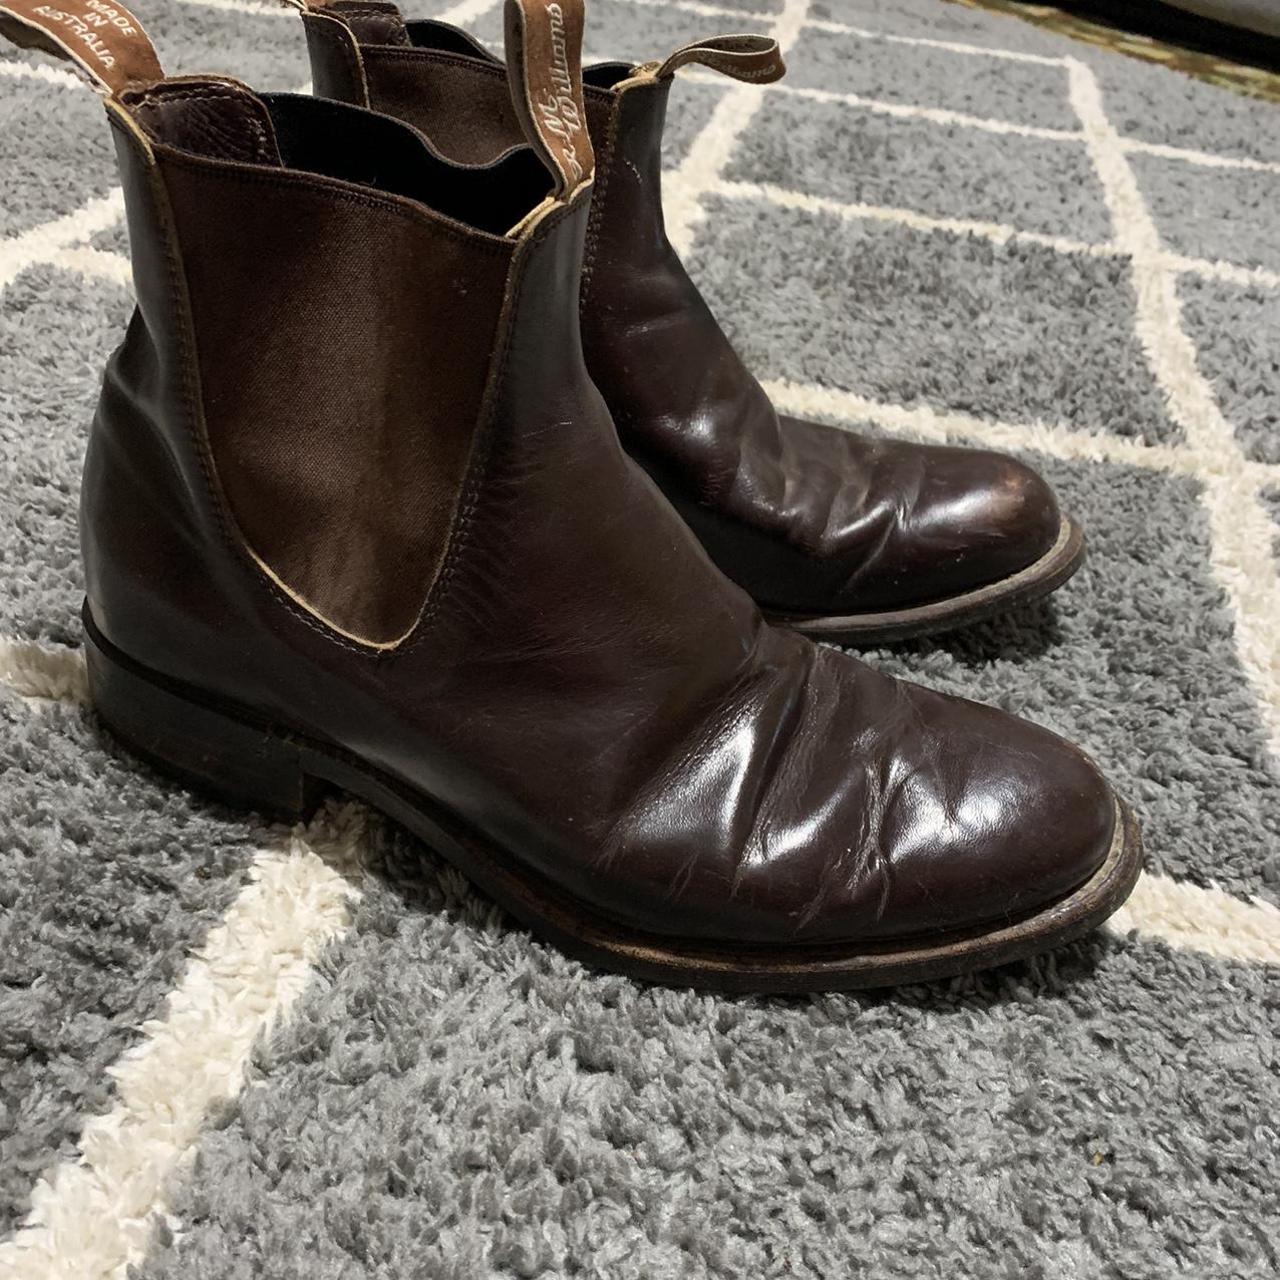 RM Williams MENS boots size 9.5 wide fit (sizing is... - Depop